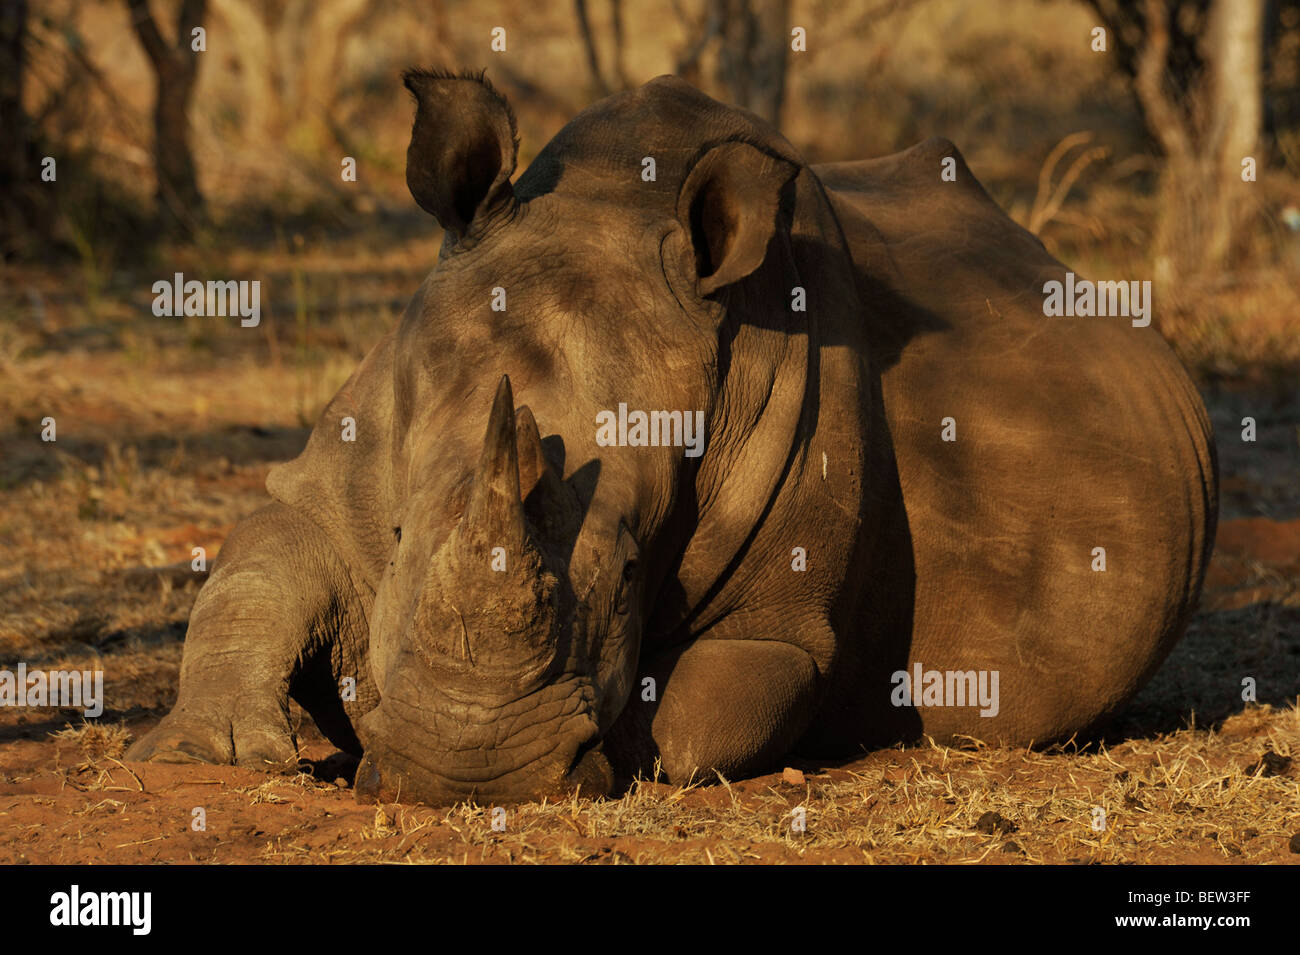 Scene of cute White Rhino Ceratotherium simum lying down face resting on ground in late afternoon Wildlife animals nature Stock Photo